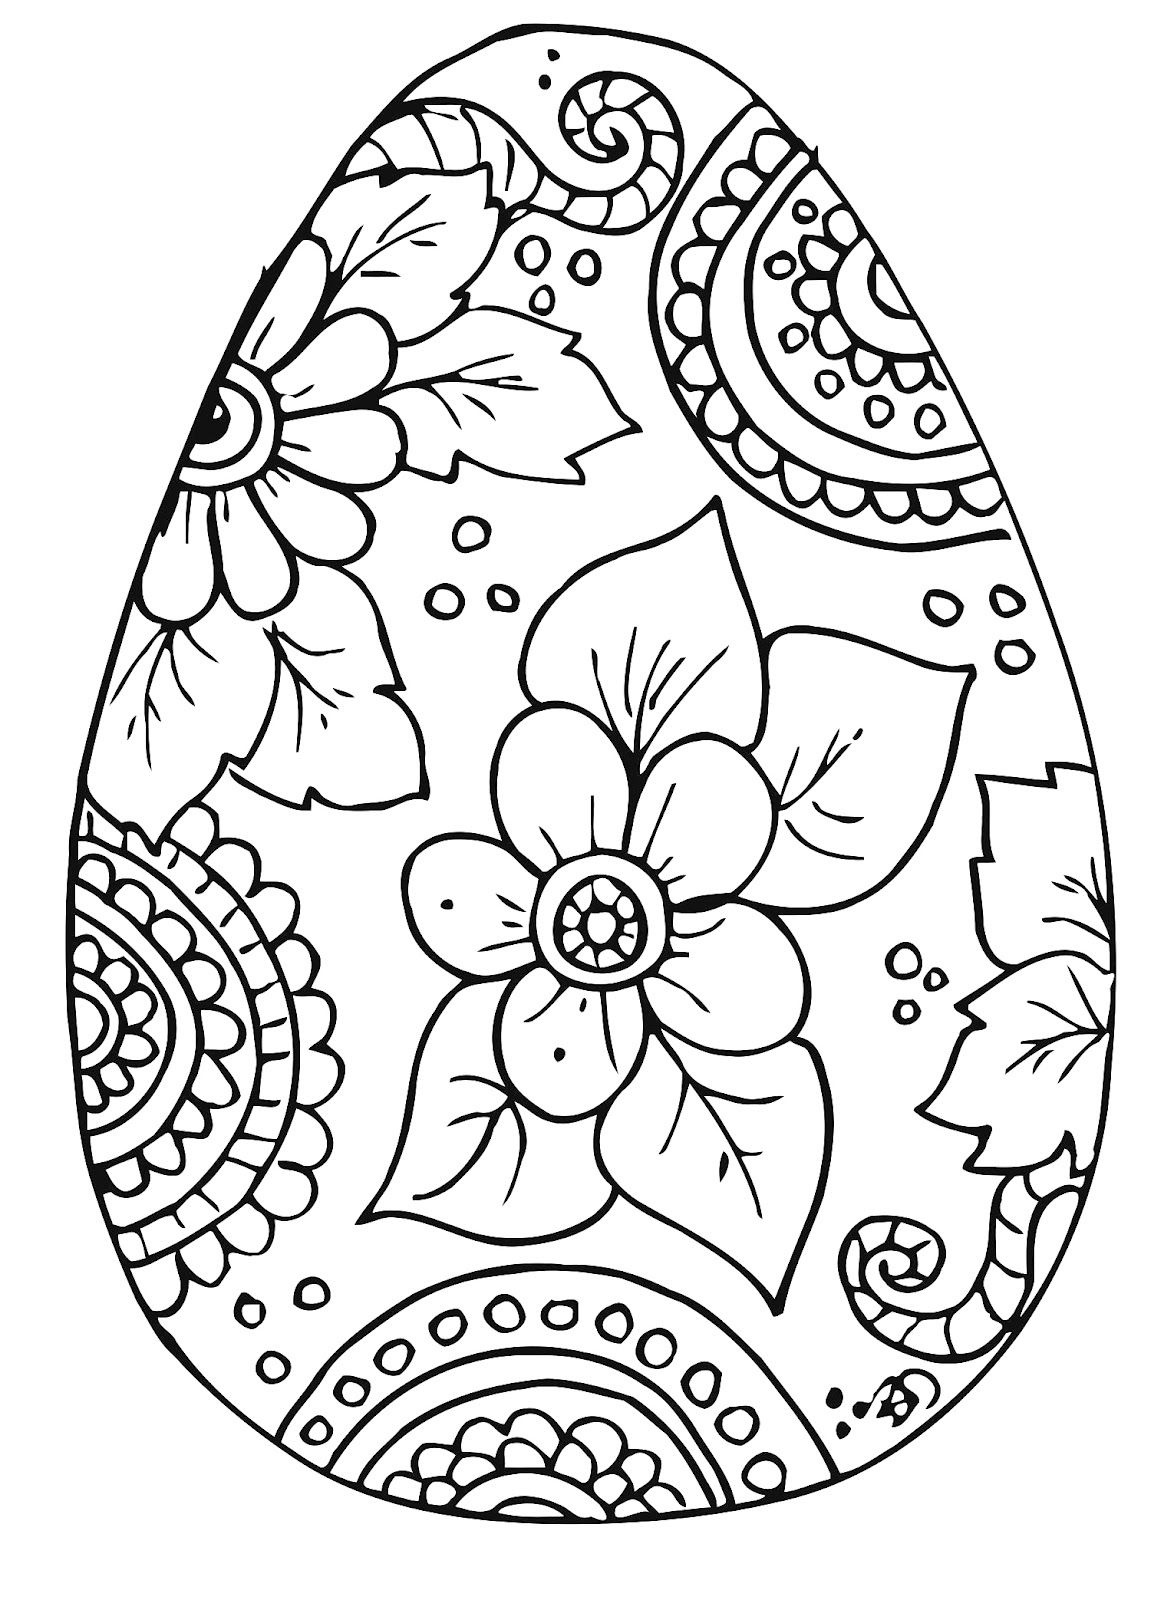 10 Cool Free Printable Easter Coloring Pages For Kids Who&amp;#039;ve Moved - Coloring Pages Free Printable Easter